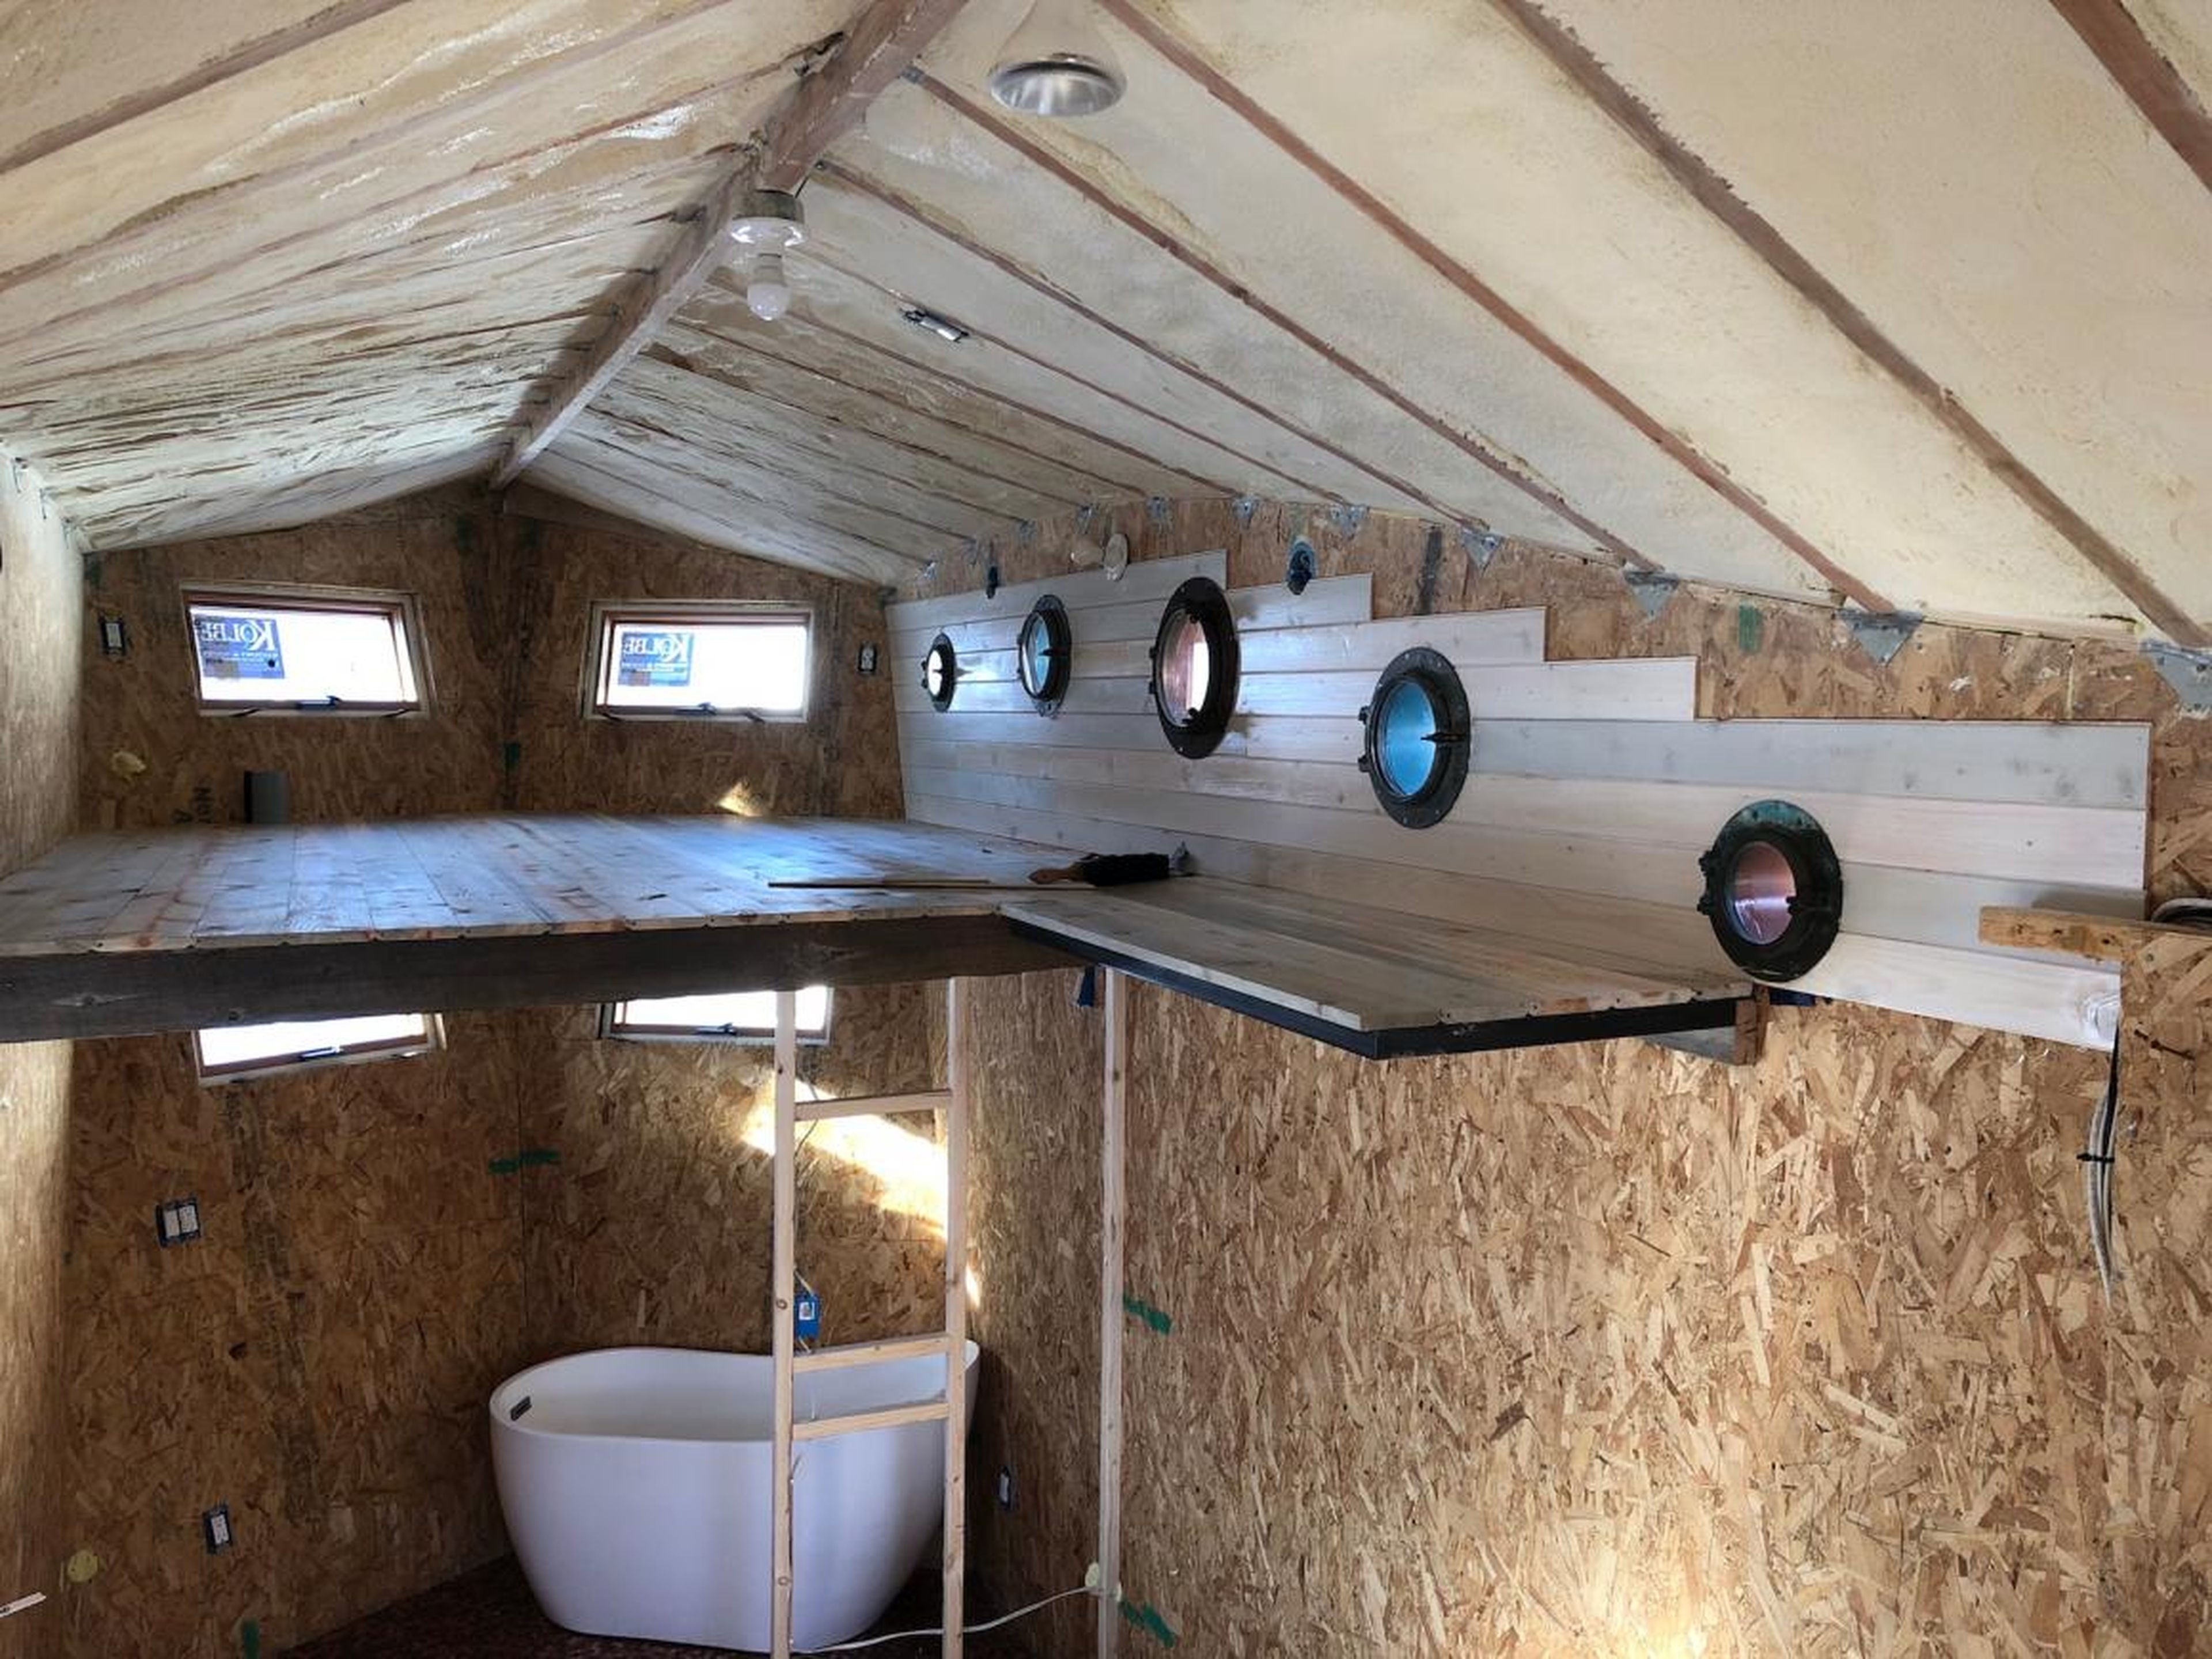 "Because we are a highly custom builder working on 'untested' designs, small conflicts are inevitable, such as the toilet lining up over a structural steel member in the trailer chassis, or the laundry box falling over the wheel